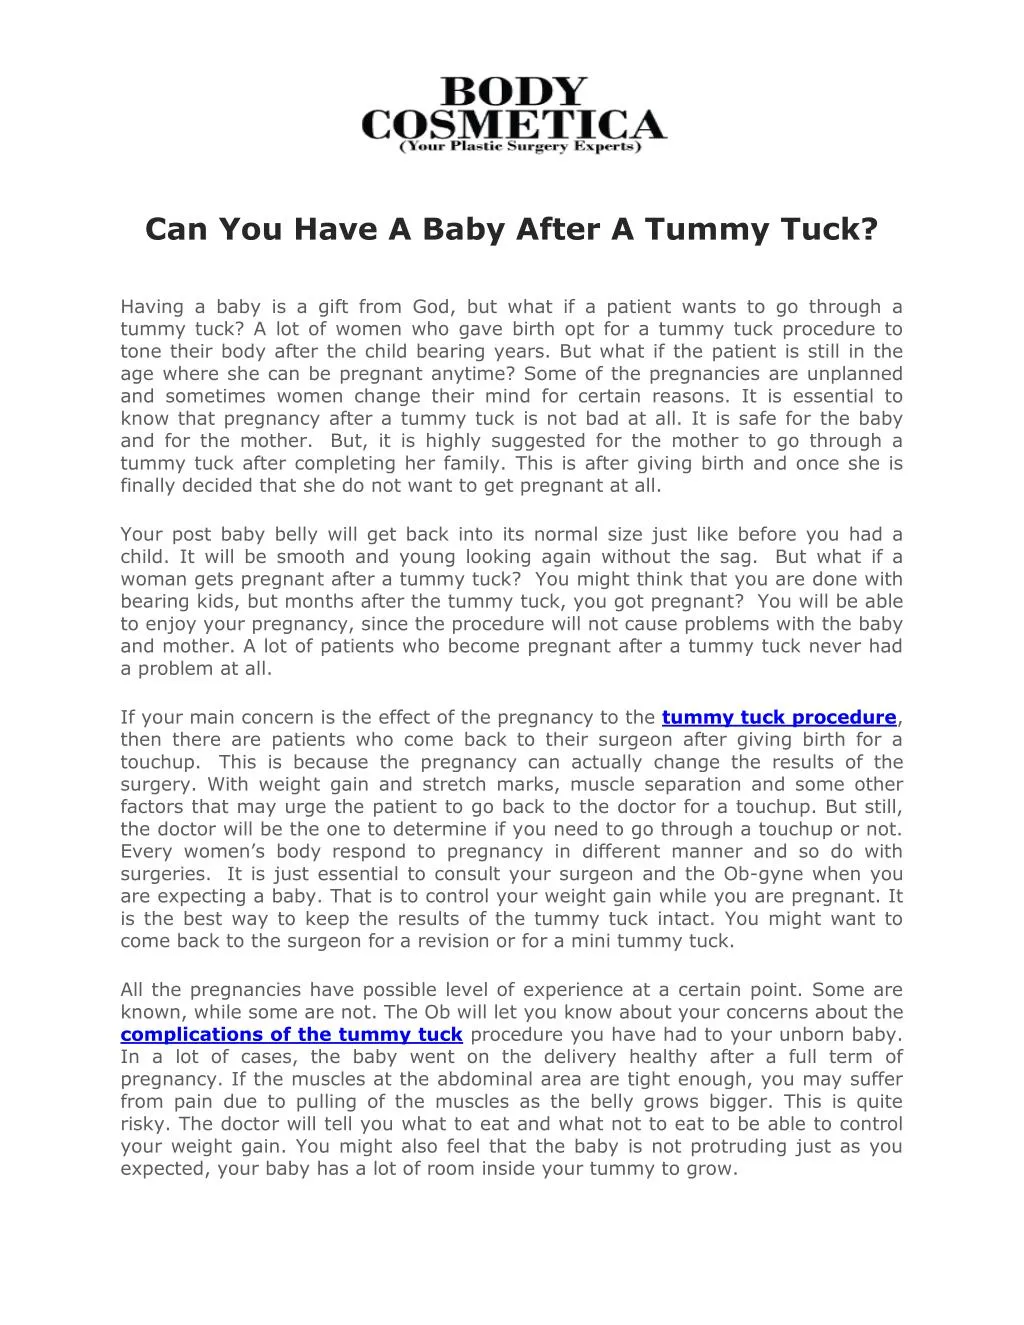 can you have a baby after a tummy tuck